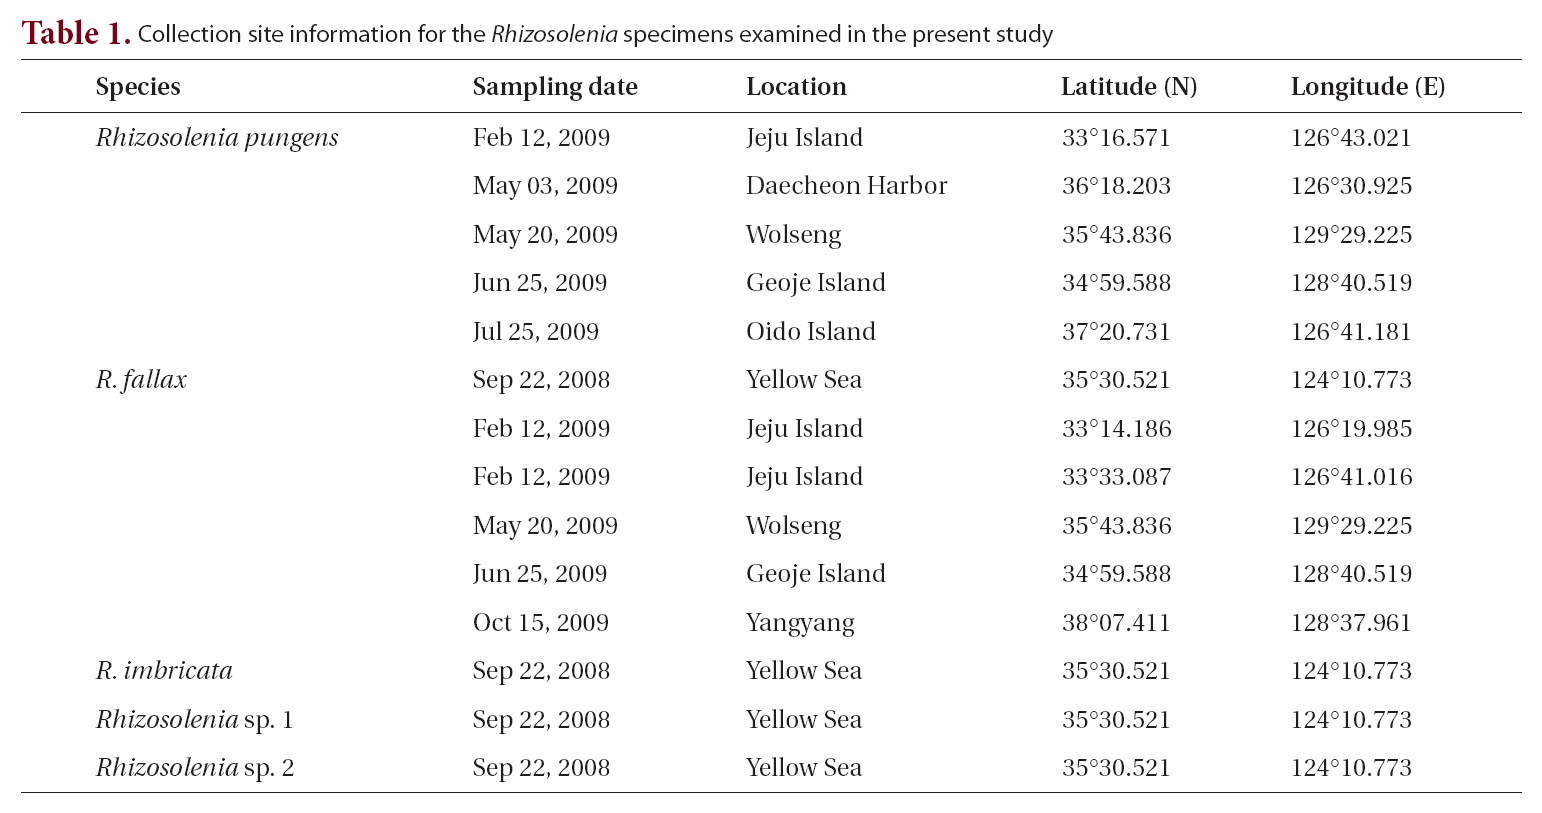 Collection site information for the Rhizosolenia specimens examined in the present study